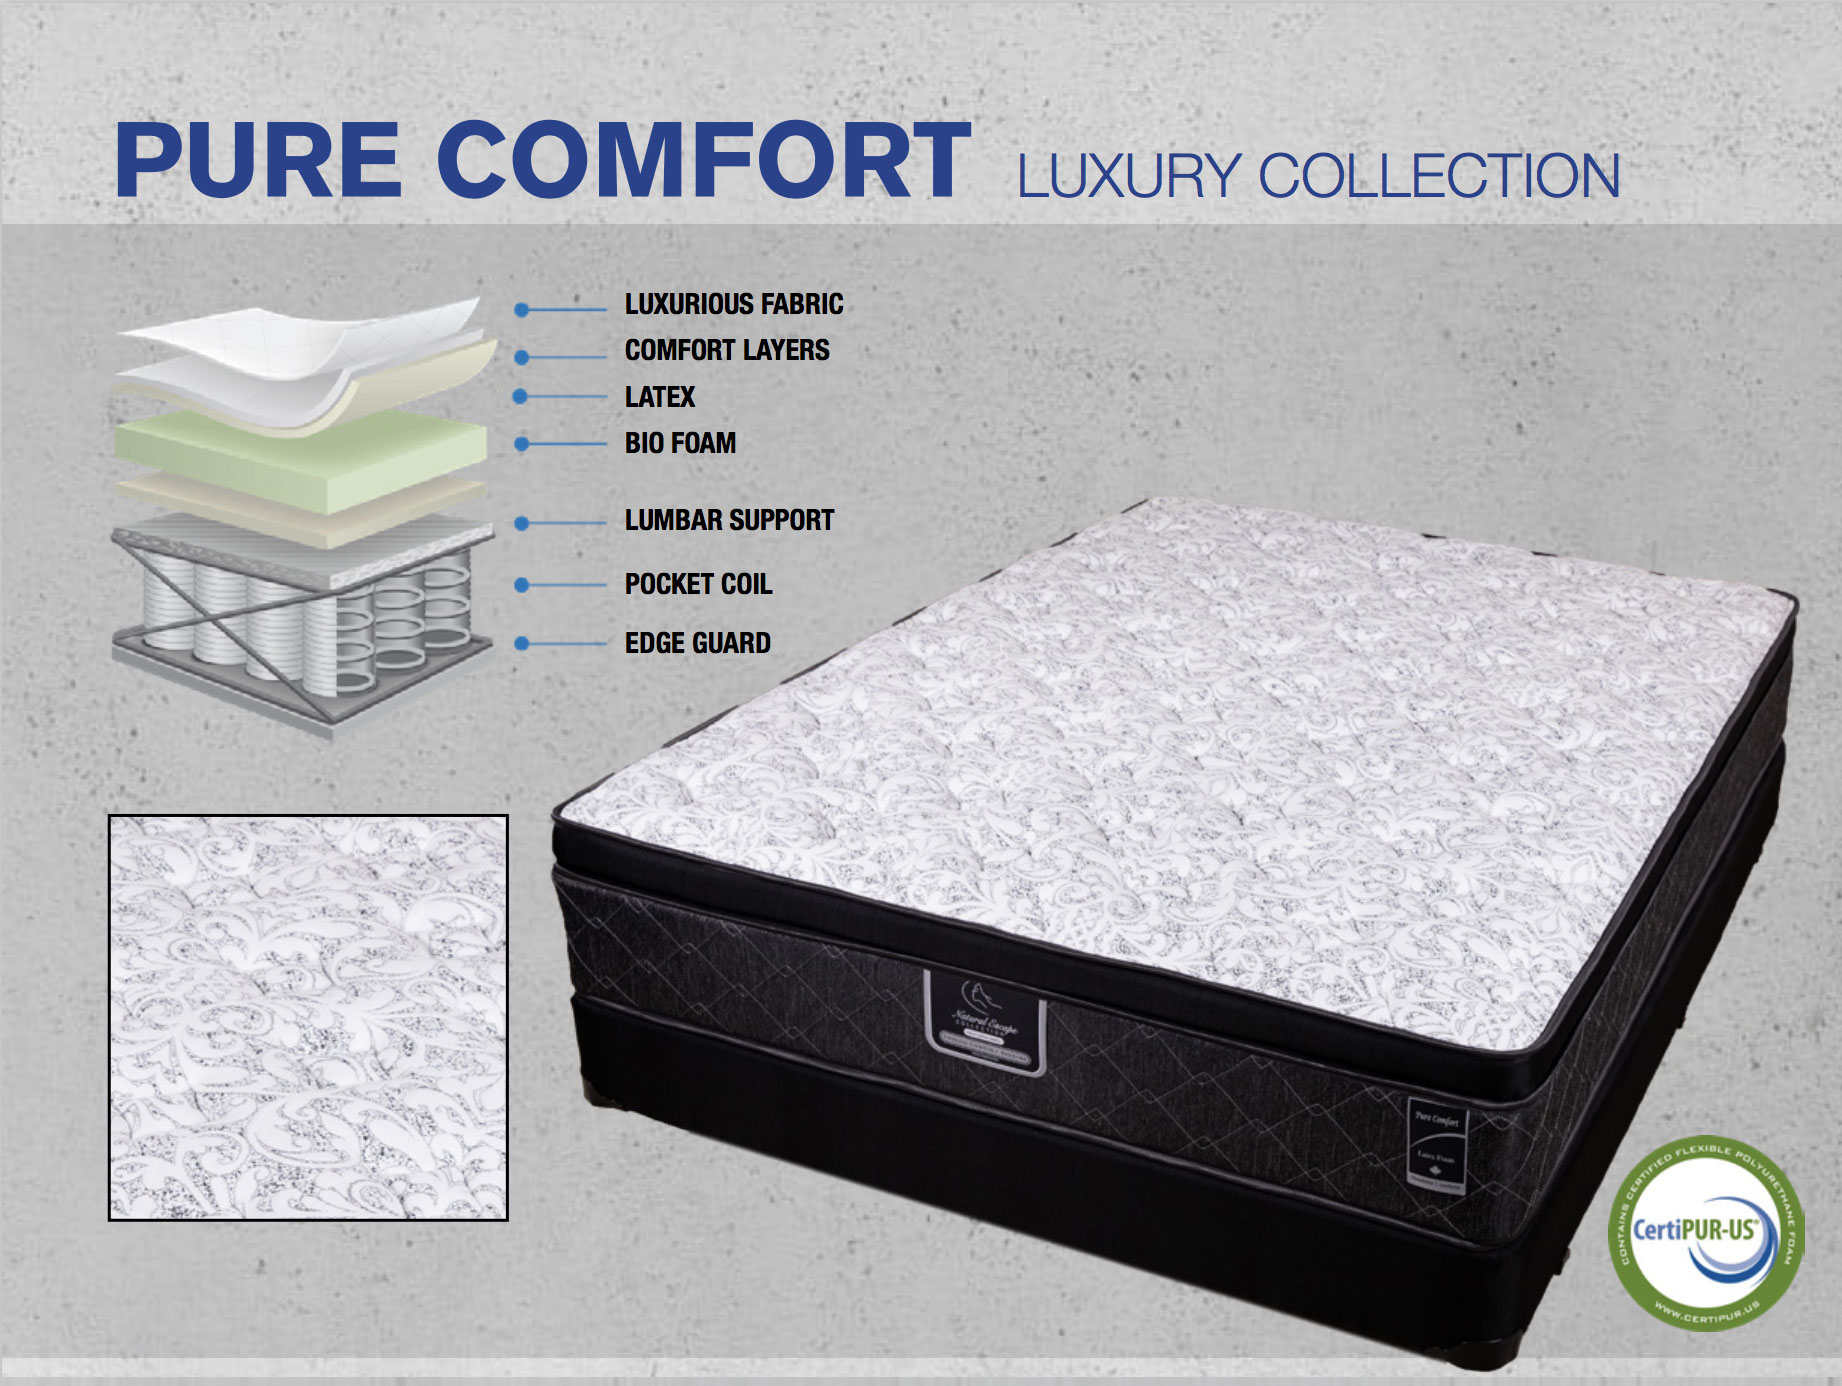 Luxury Collection - Pure Comfort - Endless Comfort Bedding